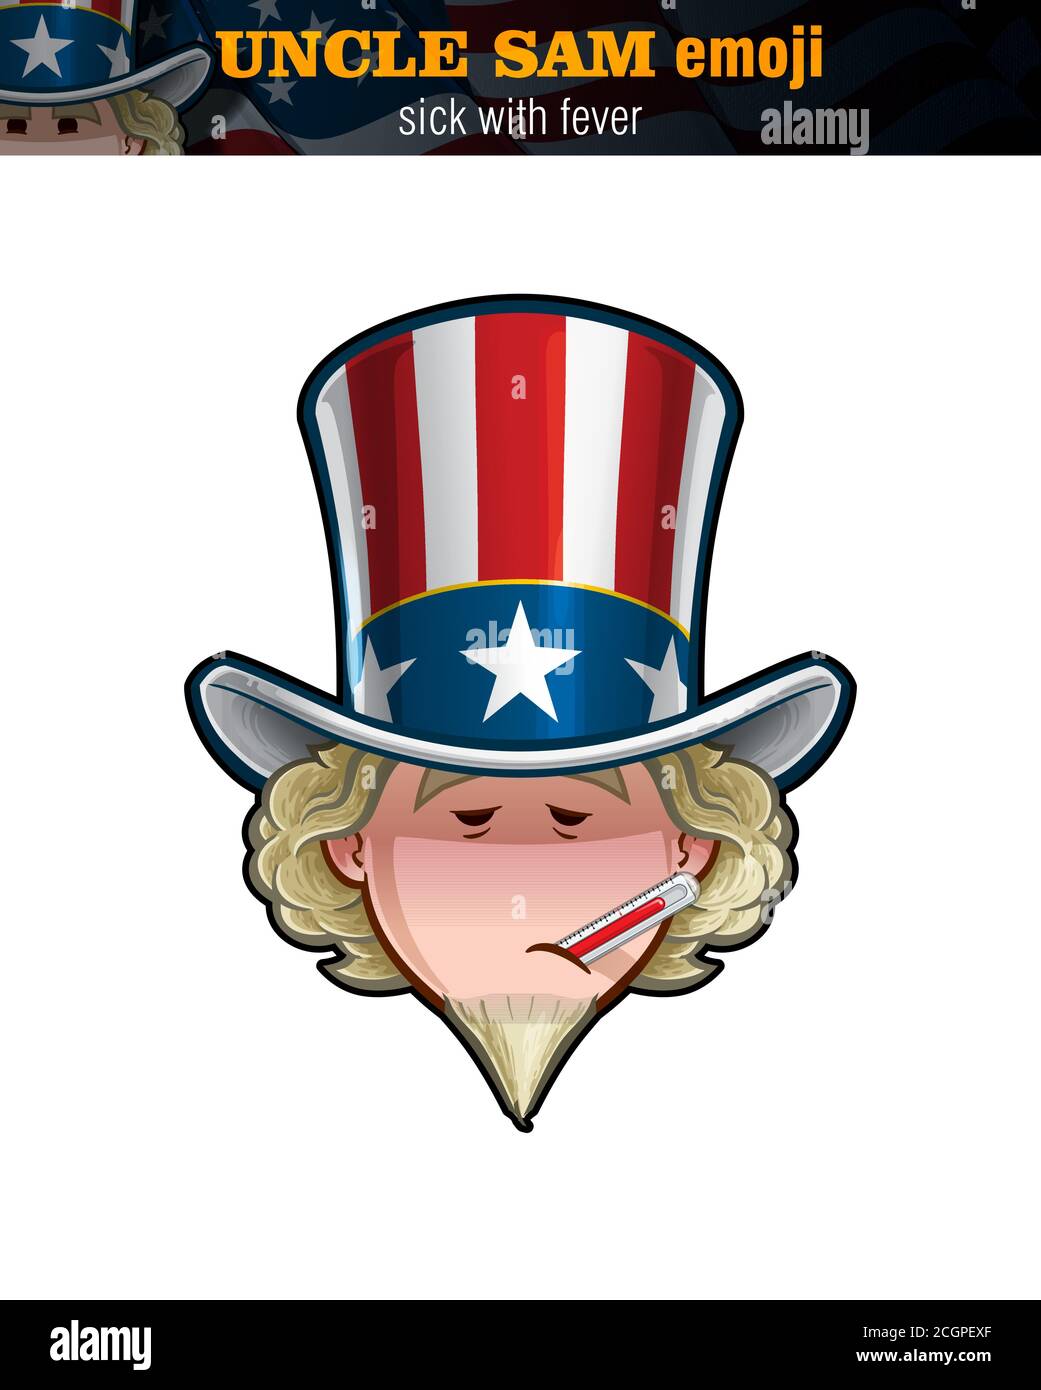 Set of Vector illustrations of a cartoon Uncle Sam Emoji, sick with fever, having a thermometer in his mouth. All elements neatly on well-defined laye Stock Vector